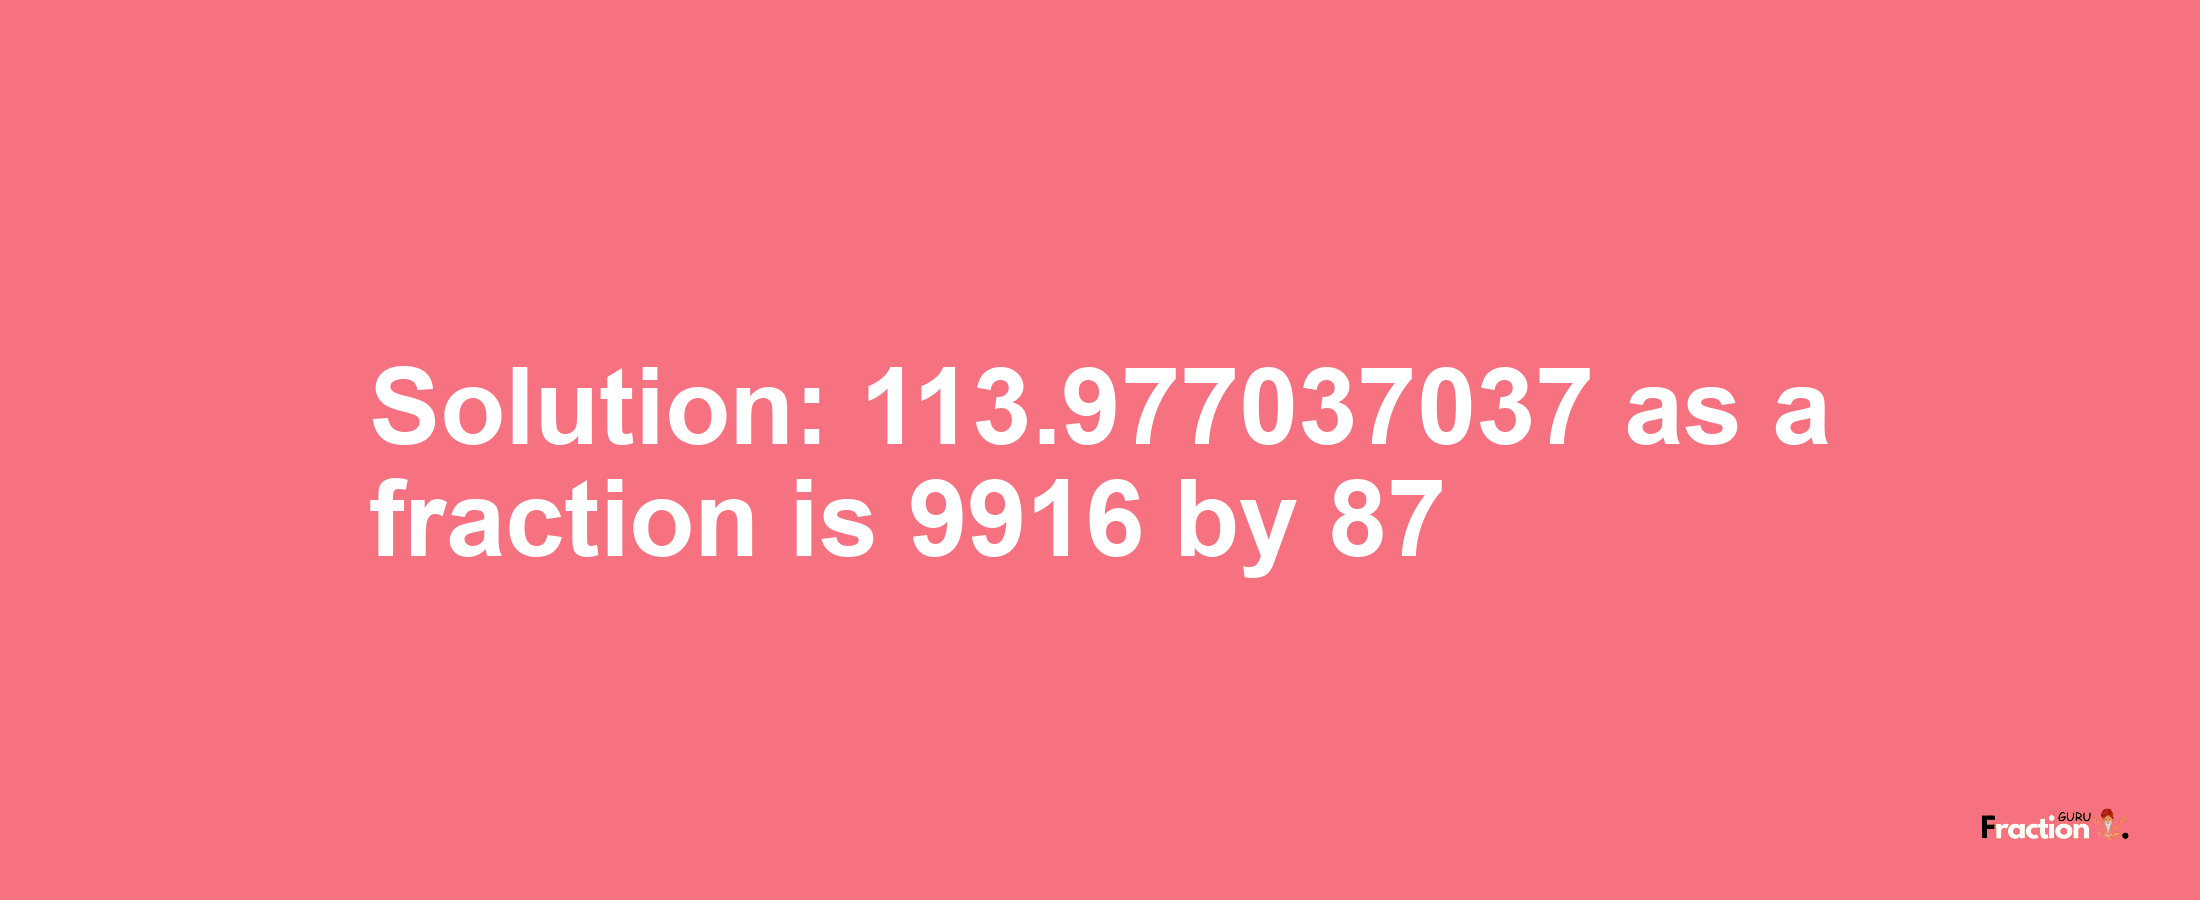 Solution:113.977037037 as a fraction is 9916/87